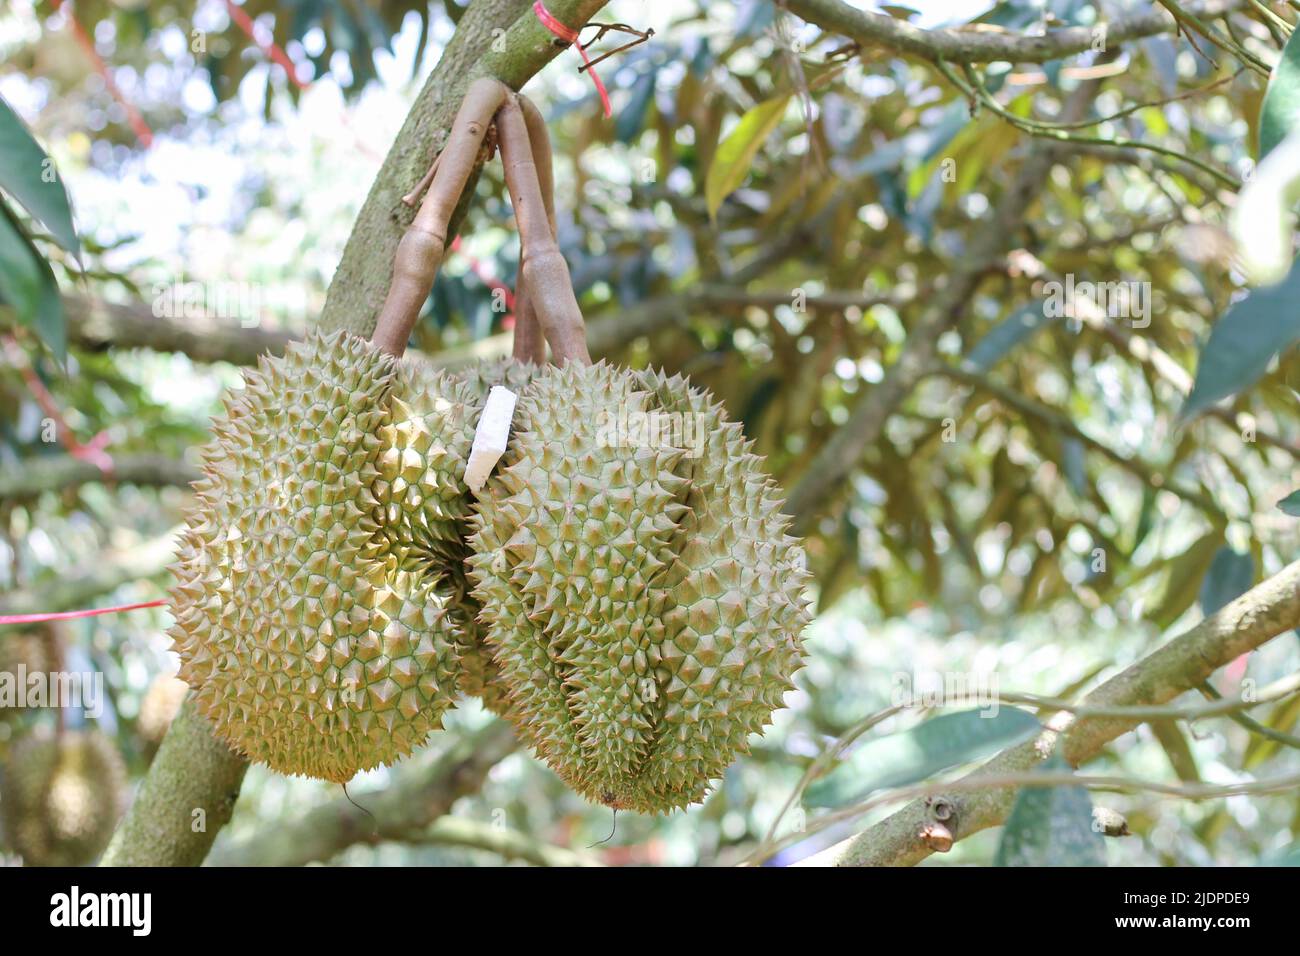 Durian from Sisaket,Thailand has a unique flavor because it is grown on soil rich in potassium from a volcanic eruption. "Volcano Durian" Stock Photo